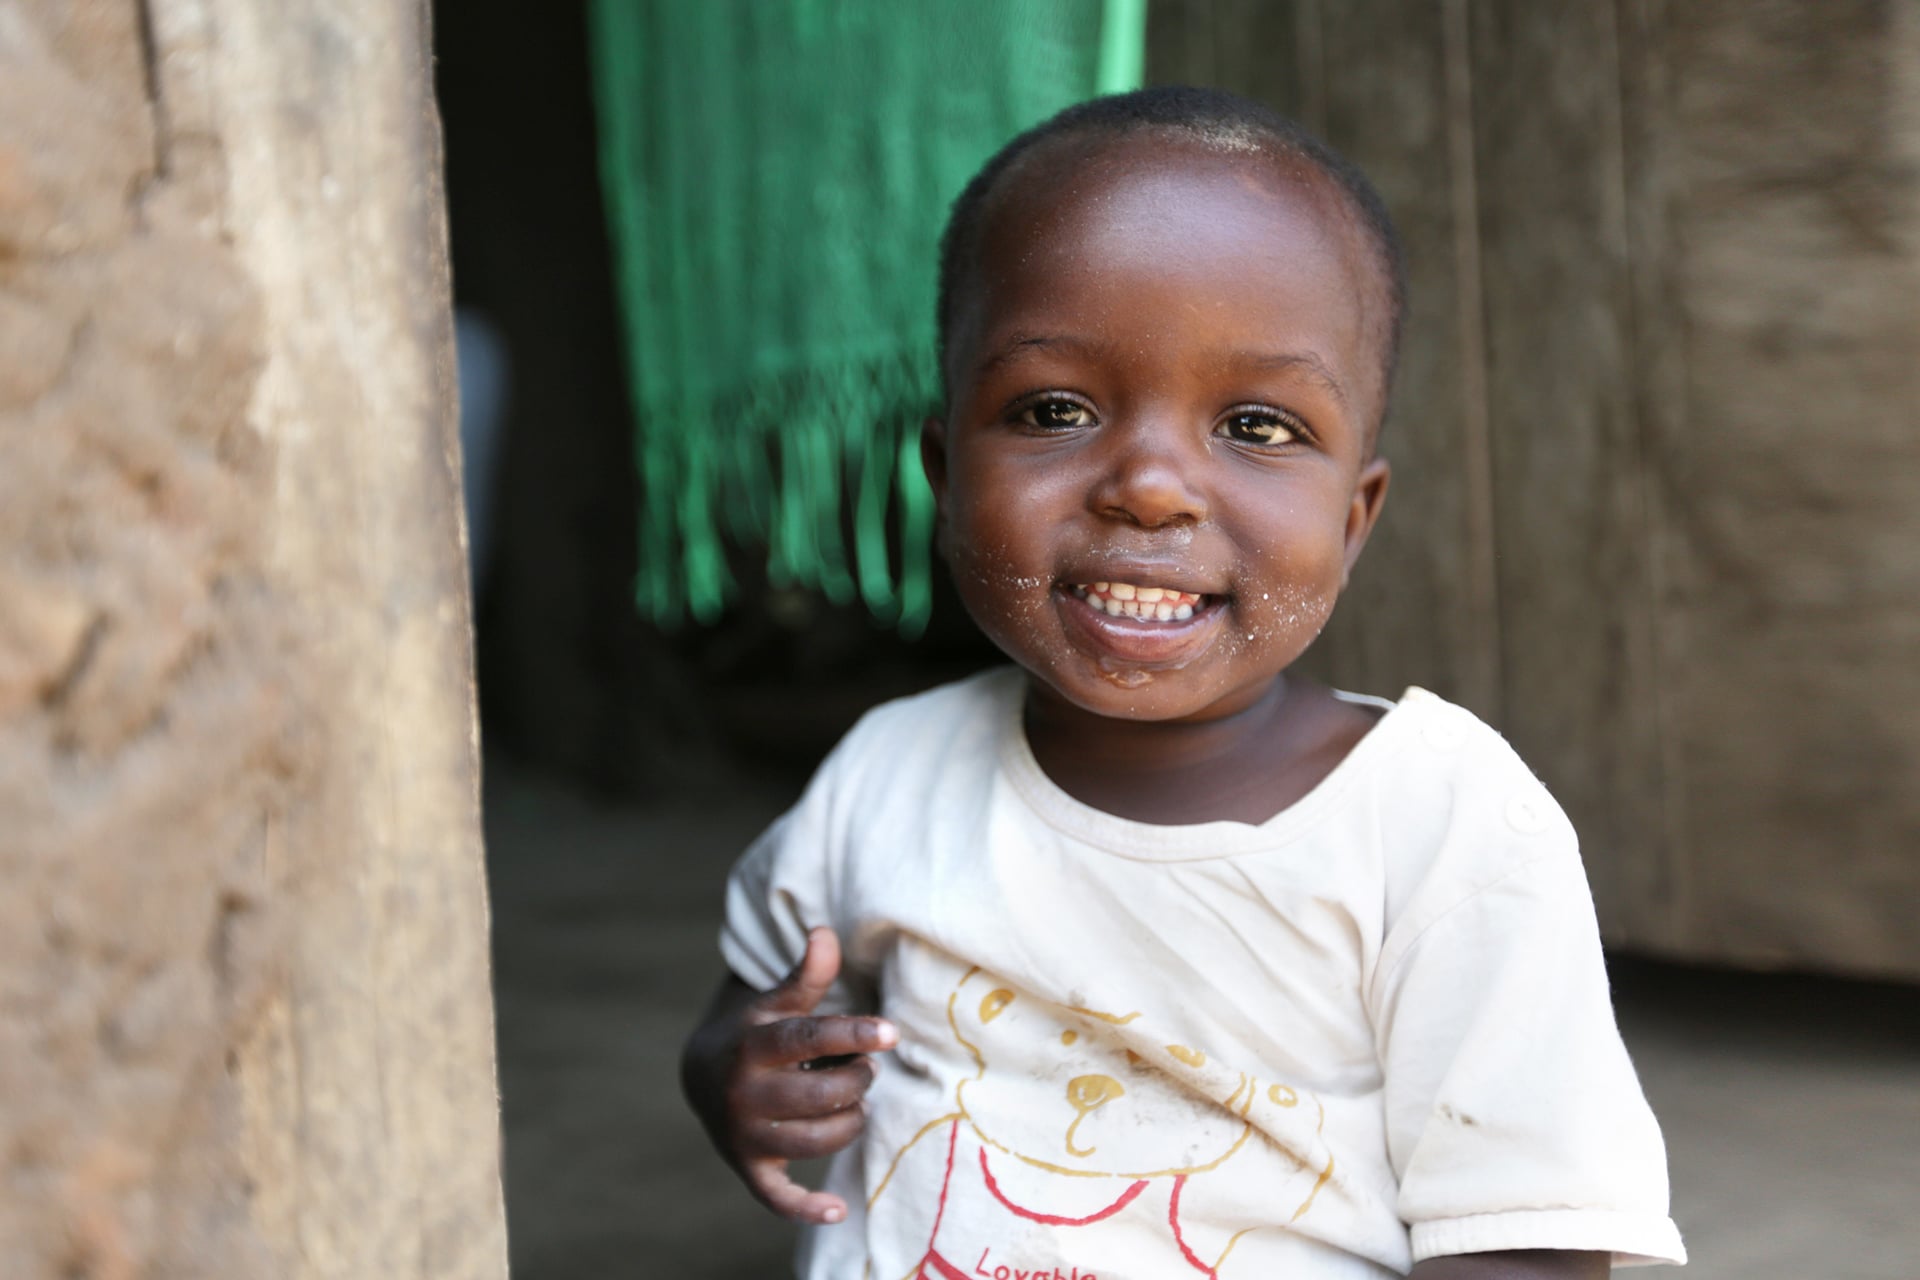 Young child in Uganda